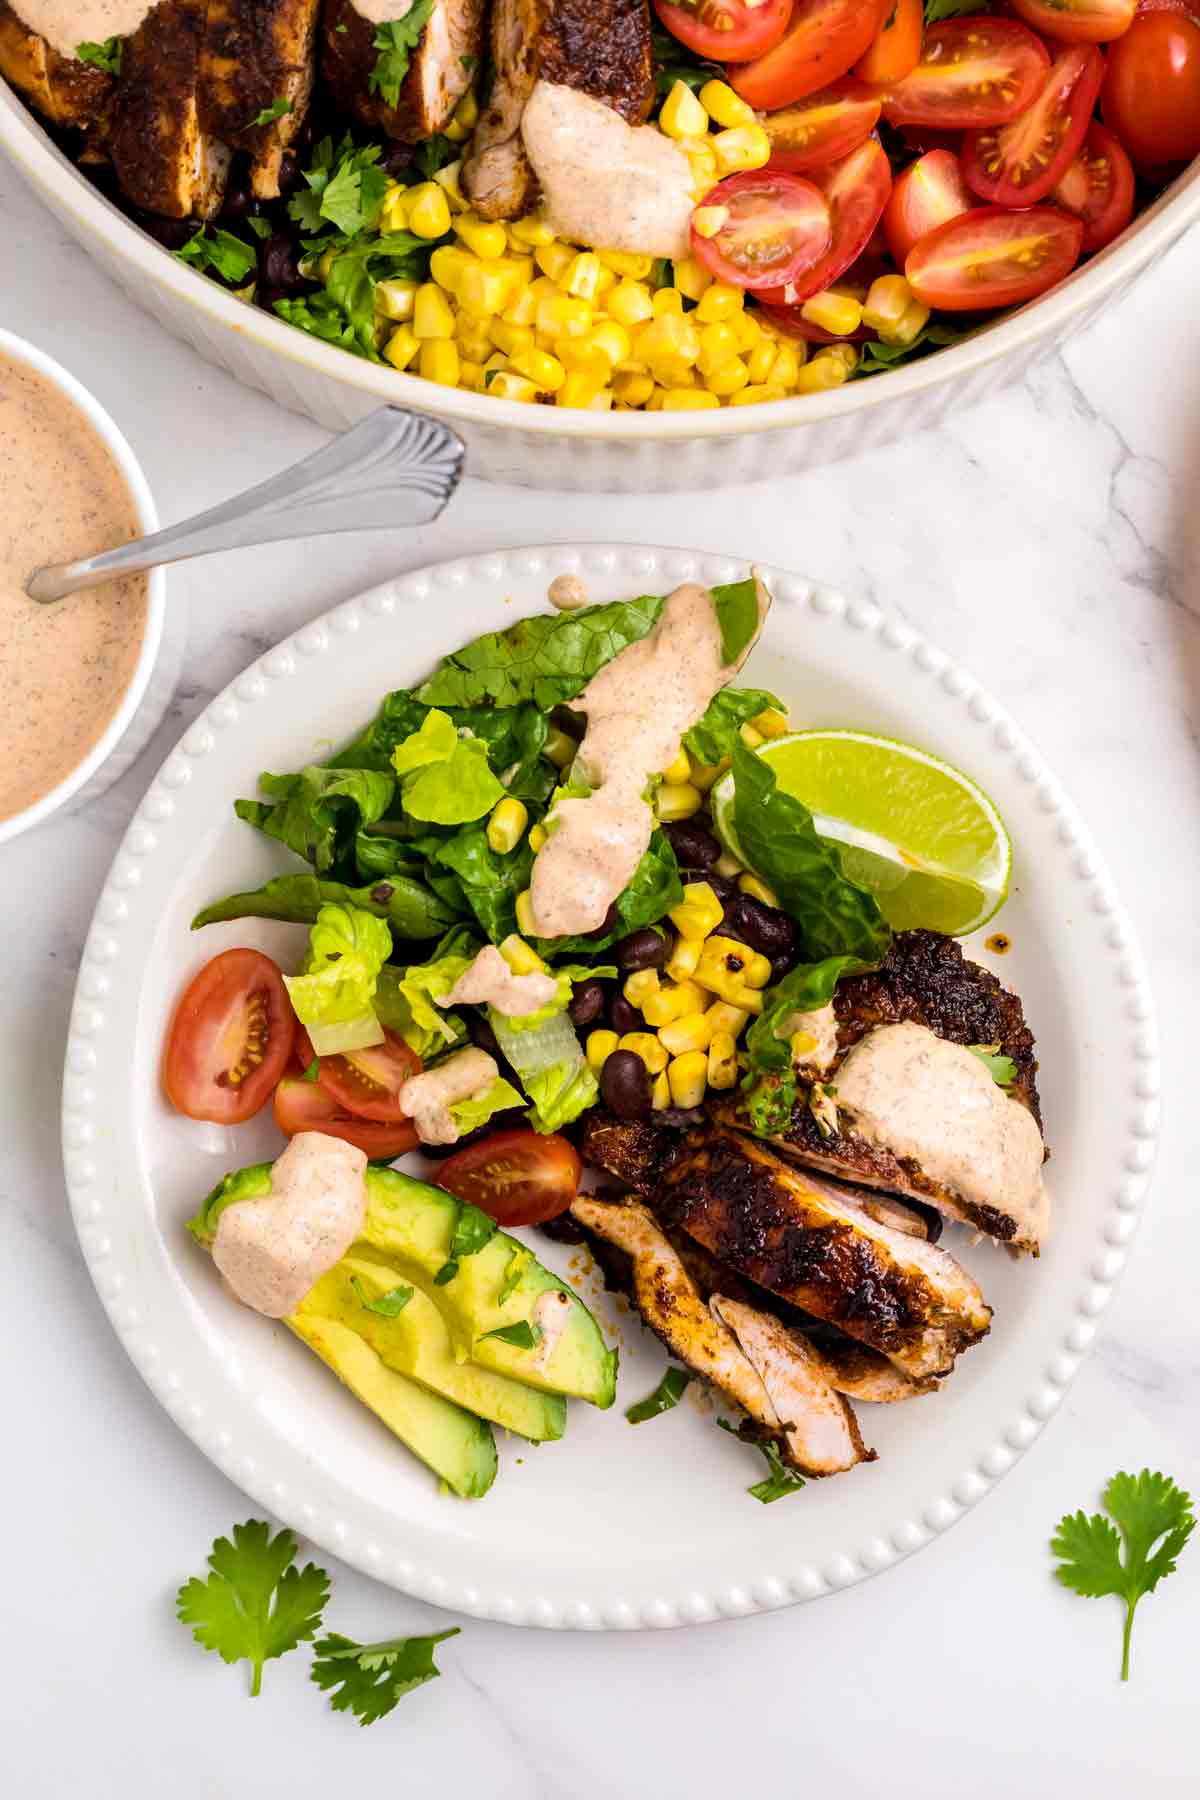 Southwest Rubbed Chicken Salad with Chipotle Dressing